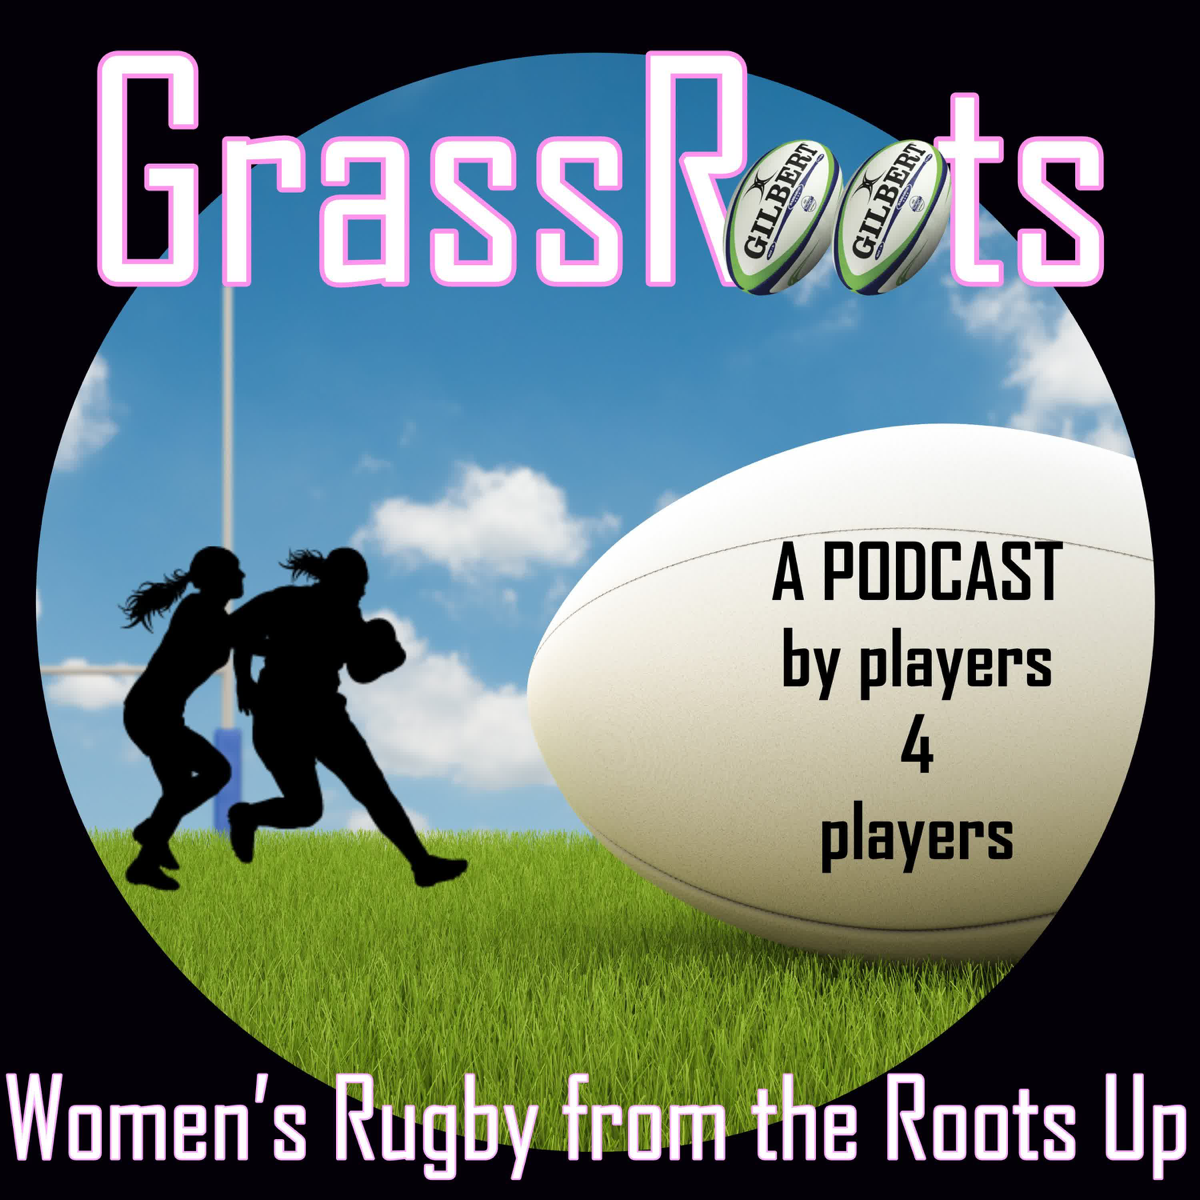 GrassRoots - Women's Rugby from the Roots Up image